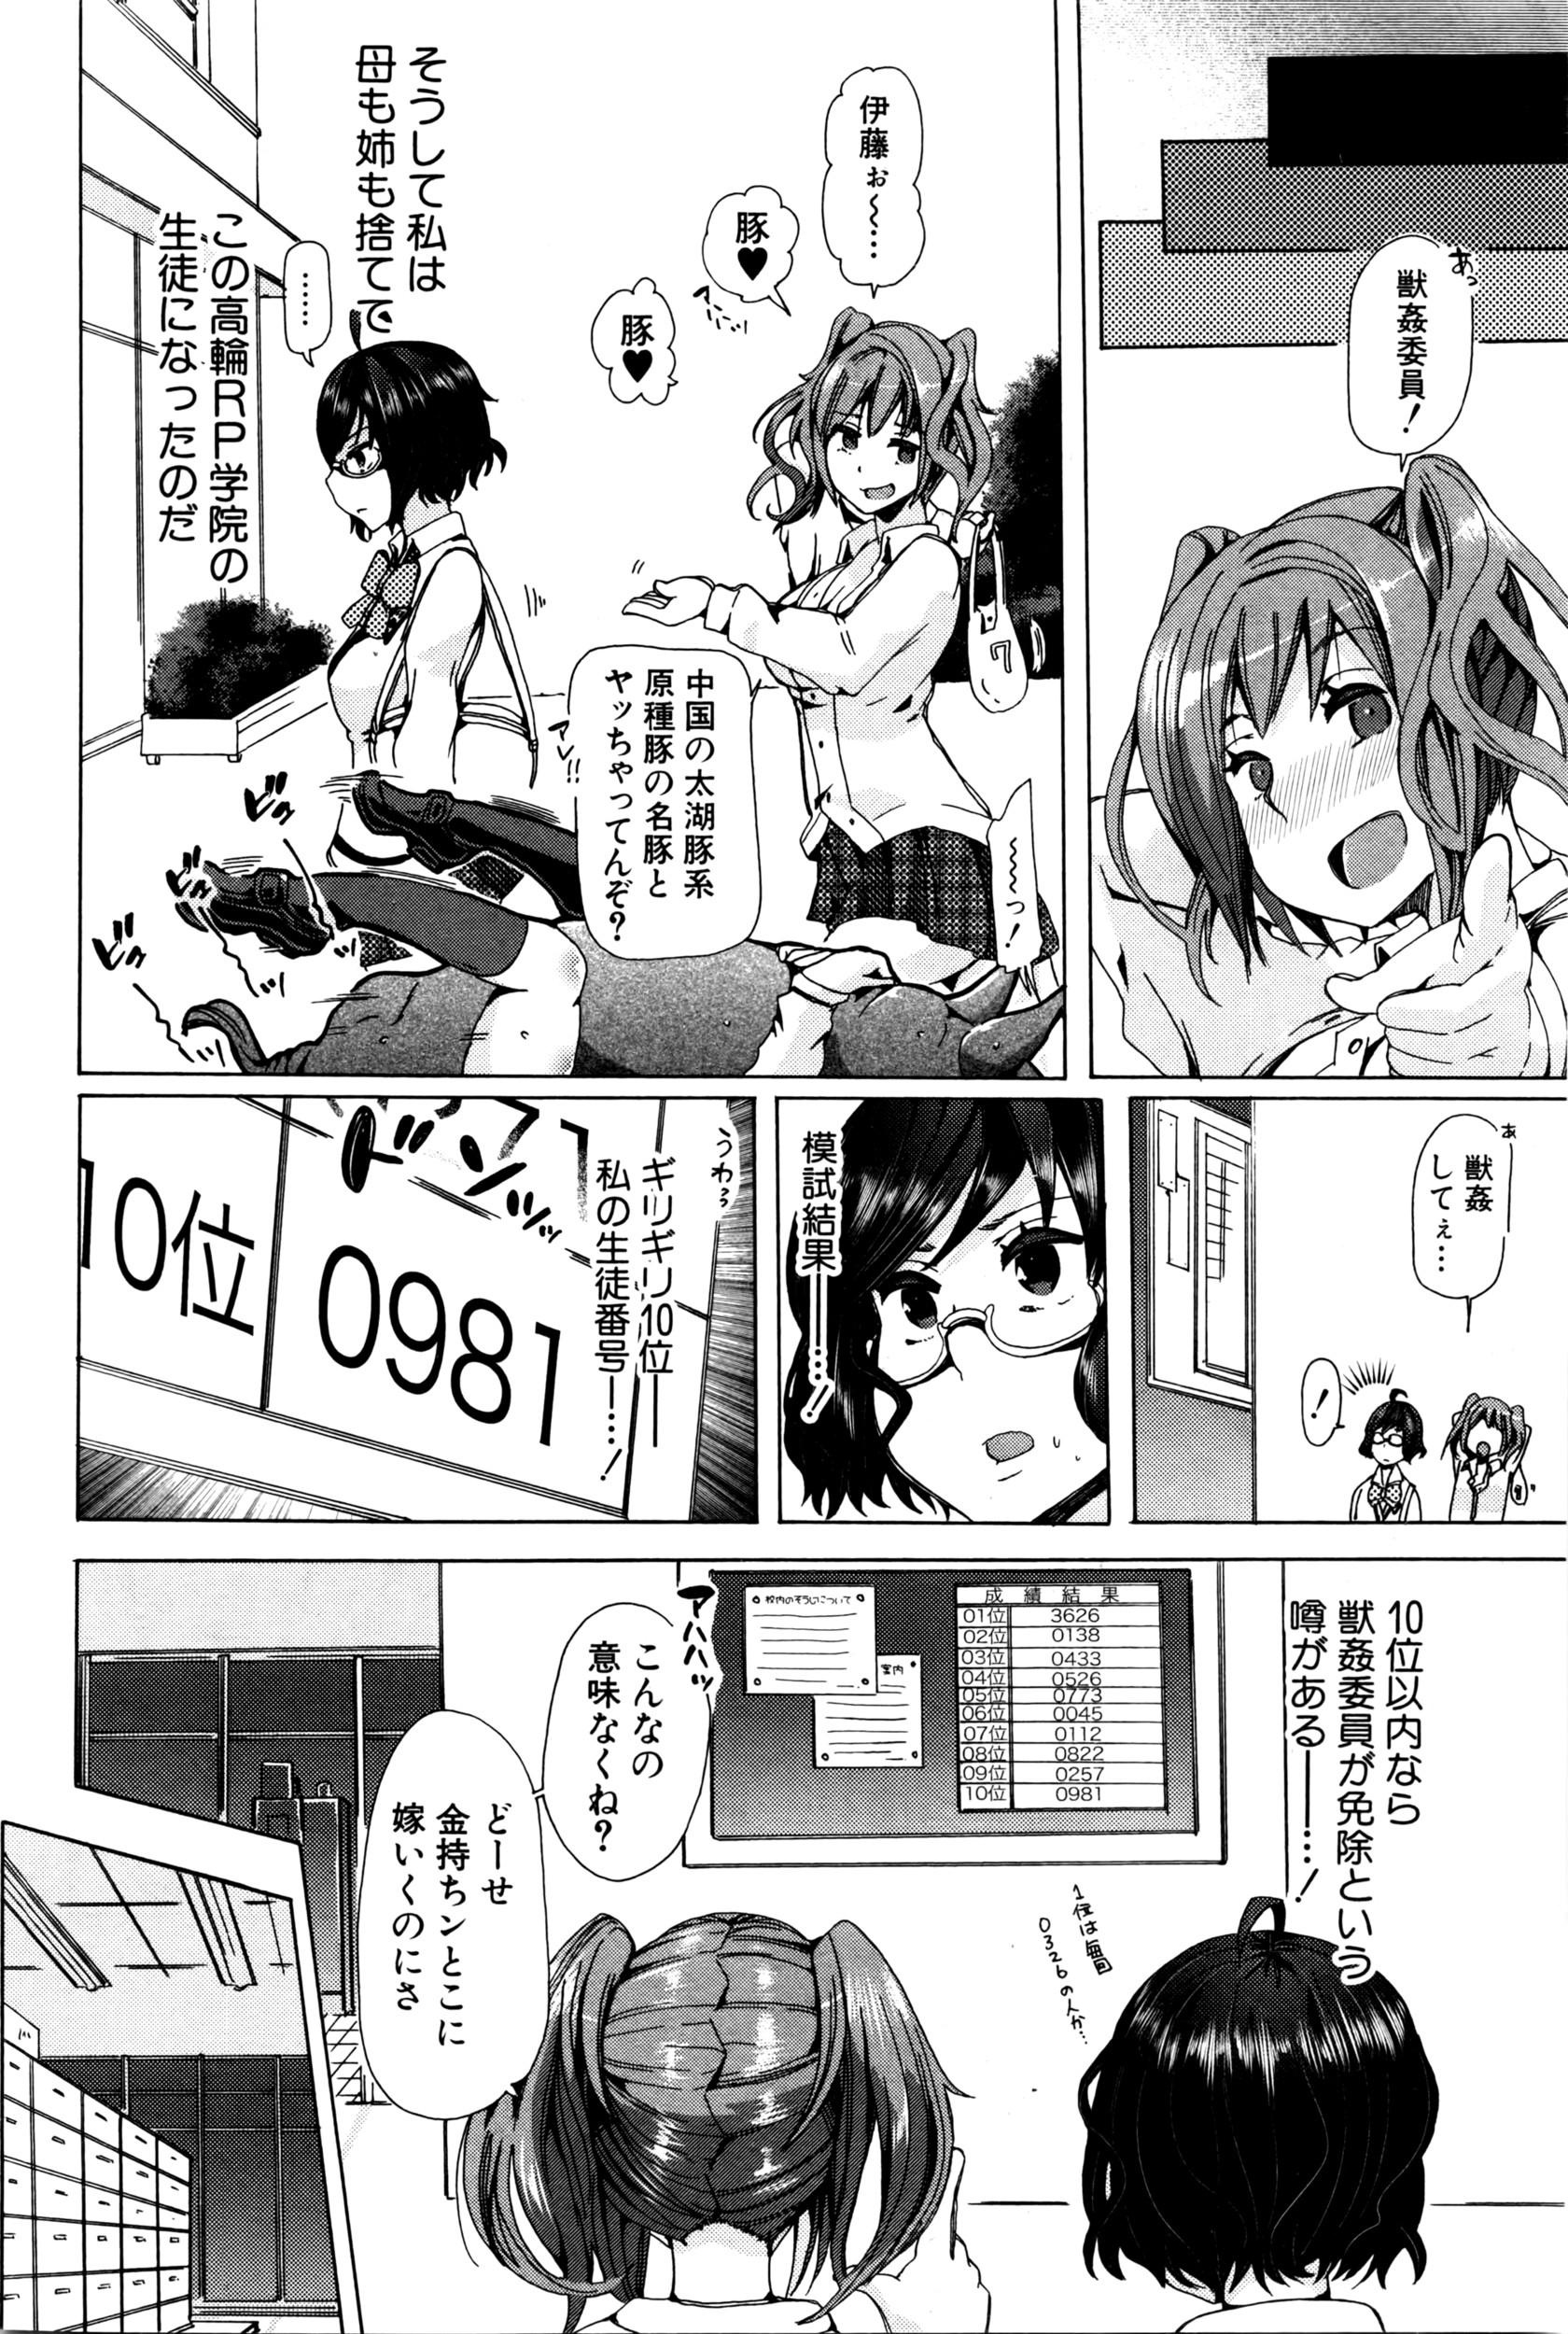 BUSTER COMIC 2016-05 135